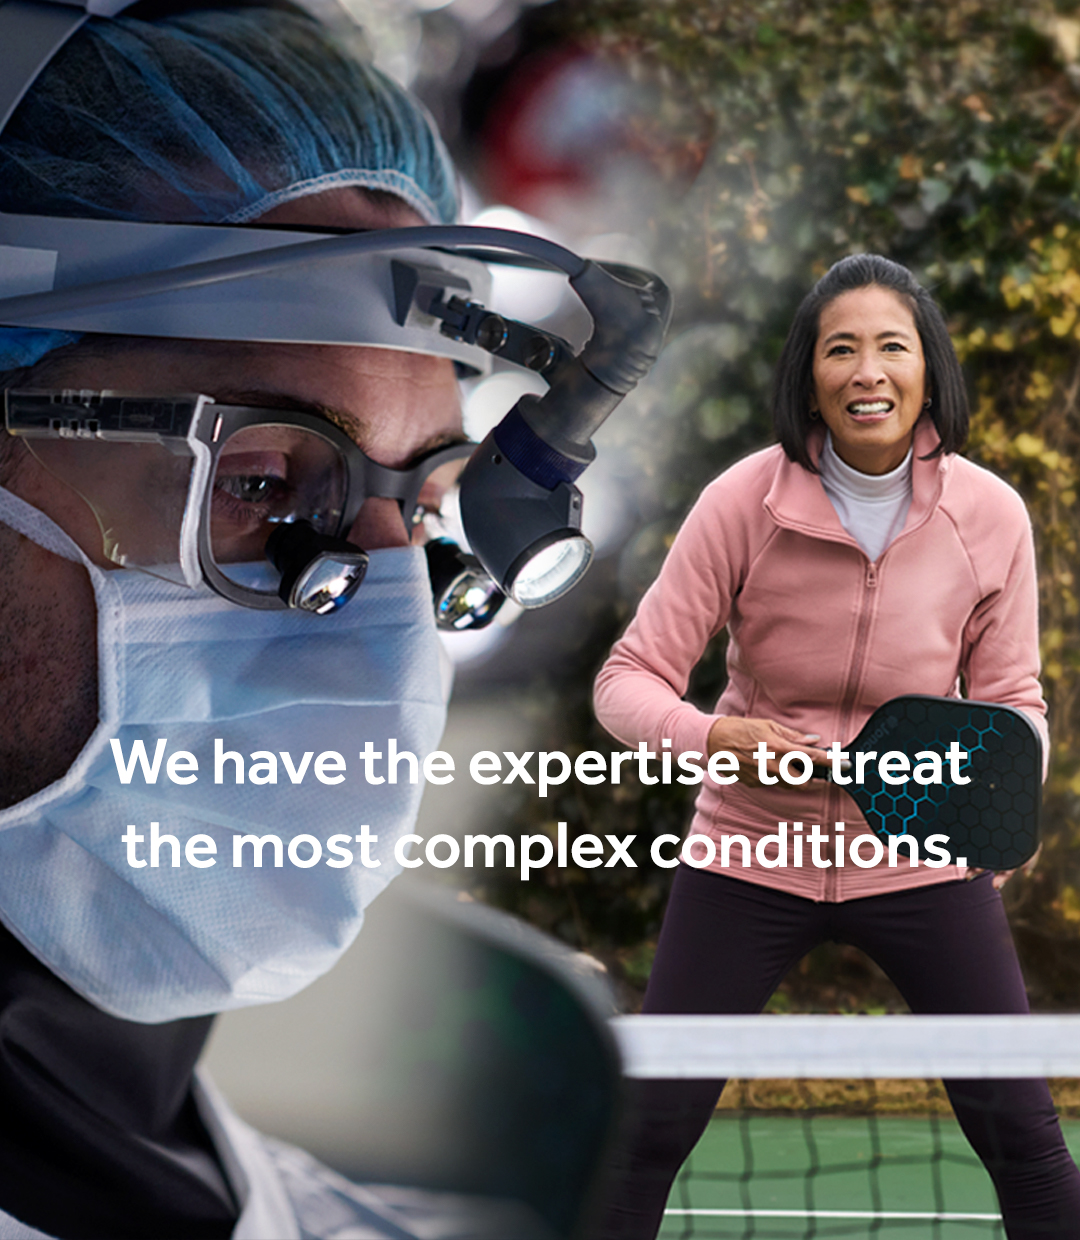 We have the expertise to treat the most complex conditions